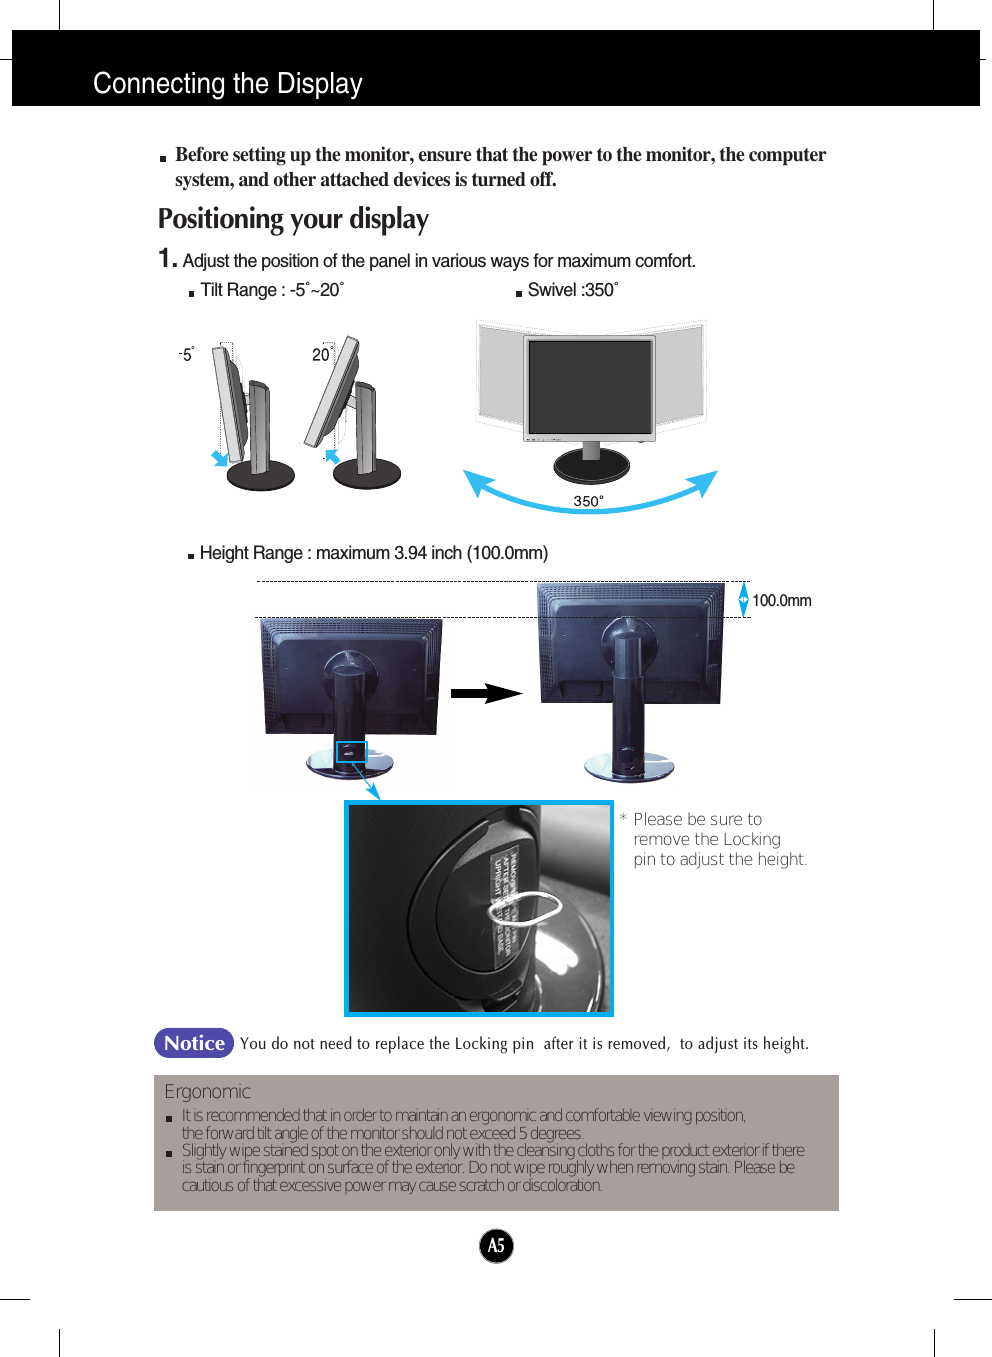 A5Connecting the DisplayBefore setting up the monitor, ensure that the power to the monitor, the computersystem, and other attached devices is turned off. Positioning your display1. Adjust the position of the panel in various ways for maximum comfort.Tilt Range : -5˚~20˚                                       Swivel :350˚ErgonomicIt is recommended that in order to maintain an ergonomic and comfortable viewing position, the forward tilt angle of the monitor should not exceed 5 degrees.Slightly wipe stained spot on the exterior only with the cleansing cloths for the product exterior if there is stain or fingerprint on surface of the exterior. Do not wipe roughly when removing stain. Please be cautious of that excessive power may cause scratch or discoloration. Height Range : maximum 3.94 inch (100.0mm)100.0mm* Please be sure to       remove the Locking pin to adjust the height.   You do not need to replace the Locking pin  after it is removed,  to adjust its height. Notice